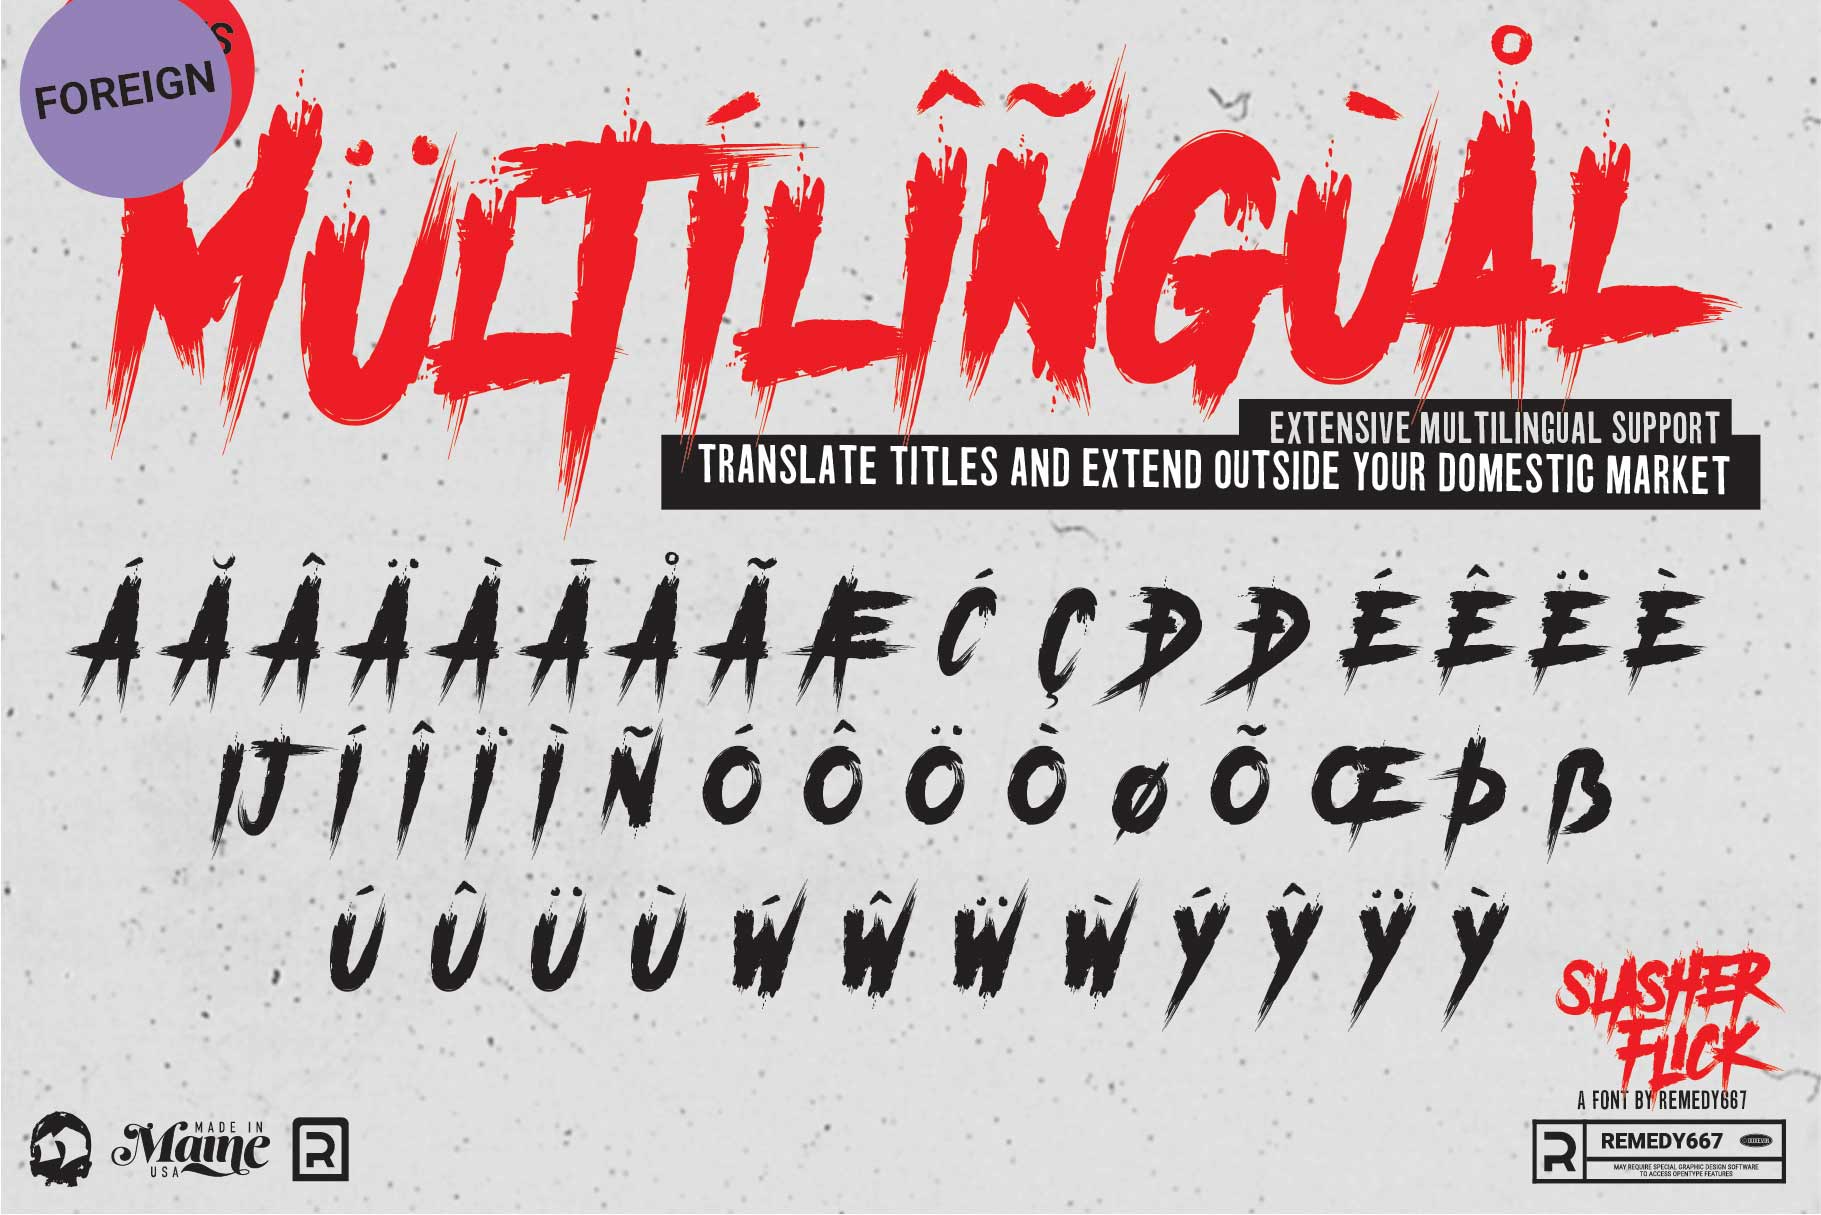 Dynamic paint stroke horror film font with multilingual support | RetroSupply Co.